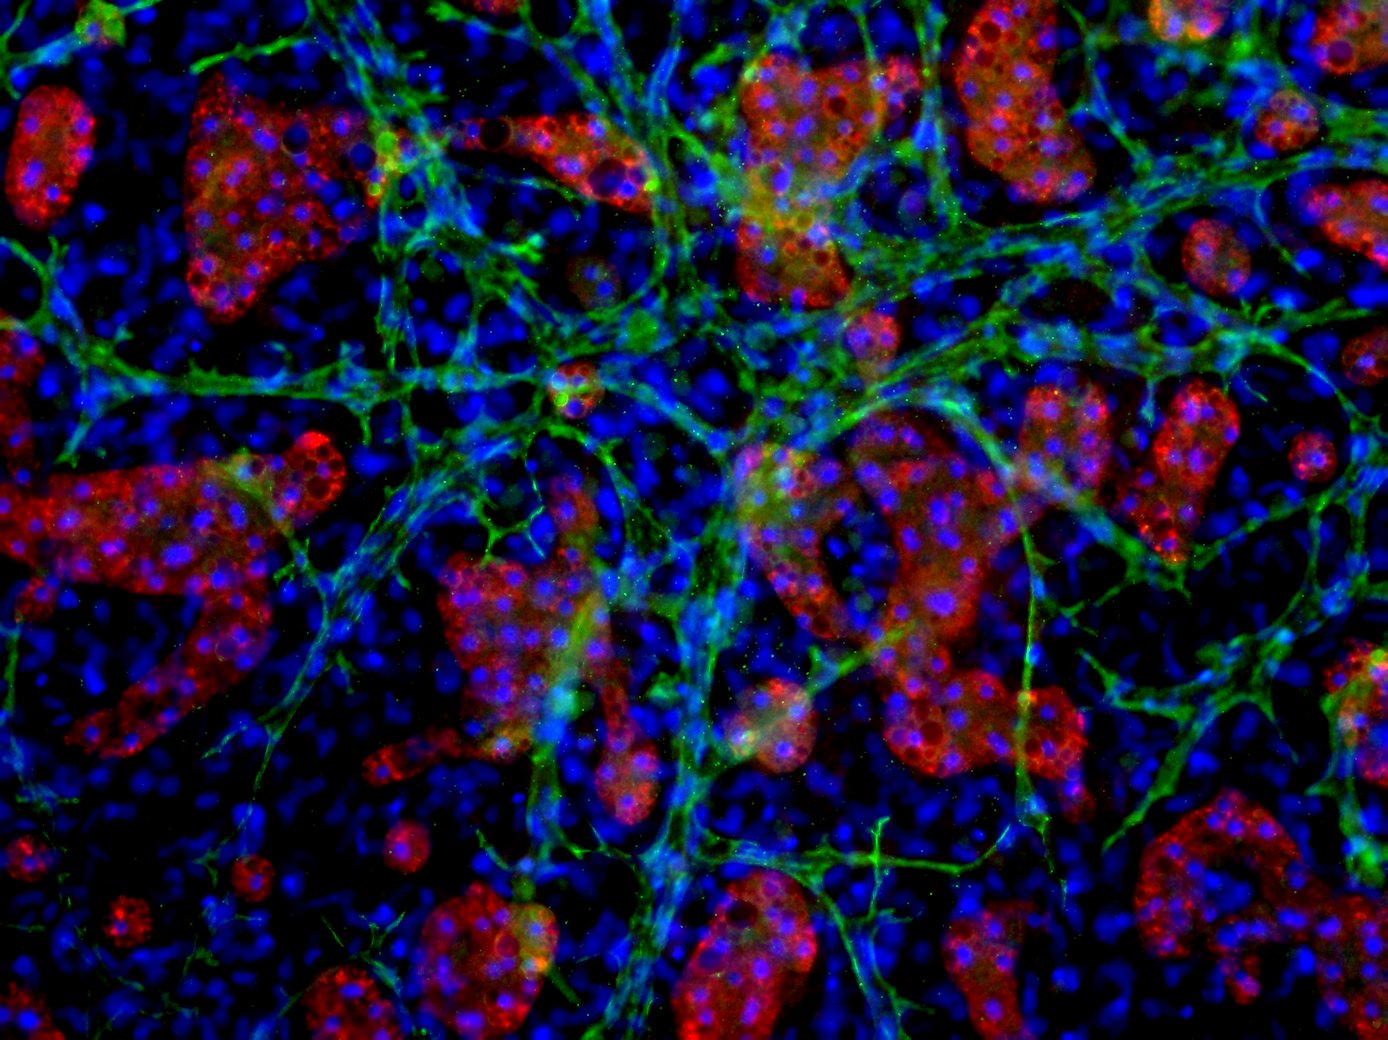 Immunofluorescent image of LifeNet Health LifeSciences all-human Hepatic Tri-Culture system at day 28 stained to show each cell type. Hepatocytes are stained in red to show albumin production, stromal cell nuceli are stained blue with DAPI, and the endothelial cells are stained for CD31 in green.